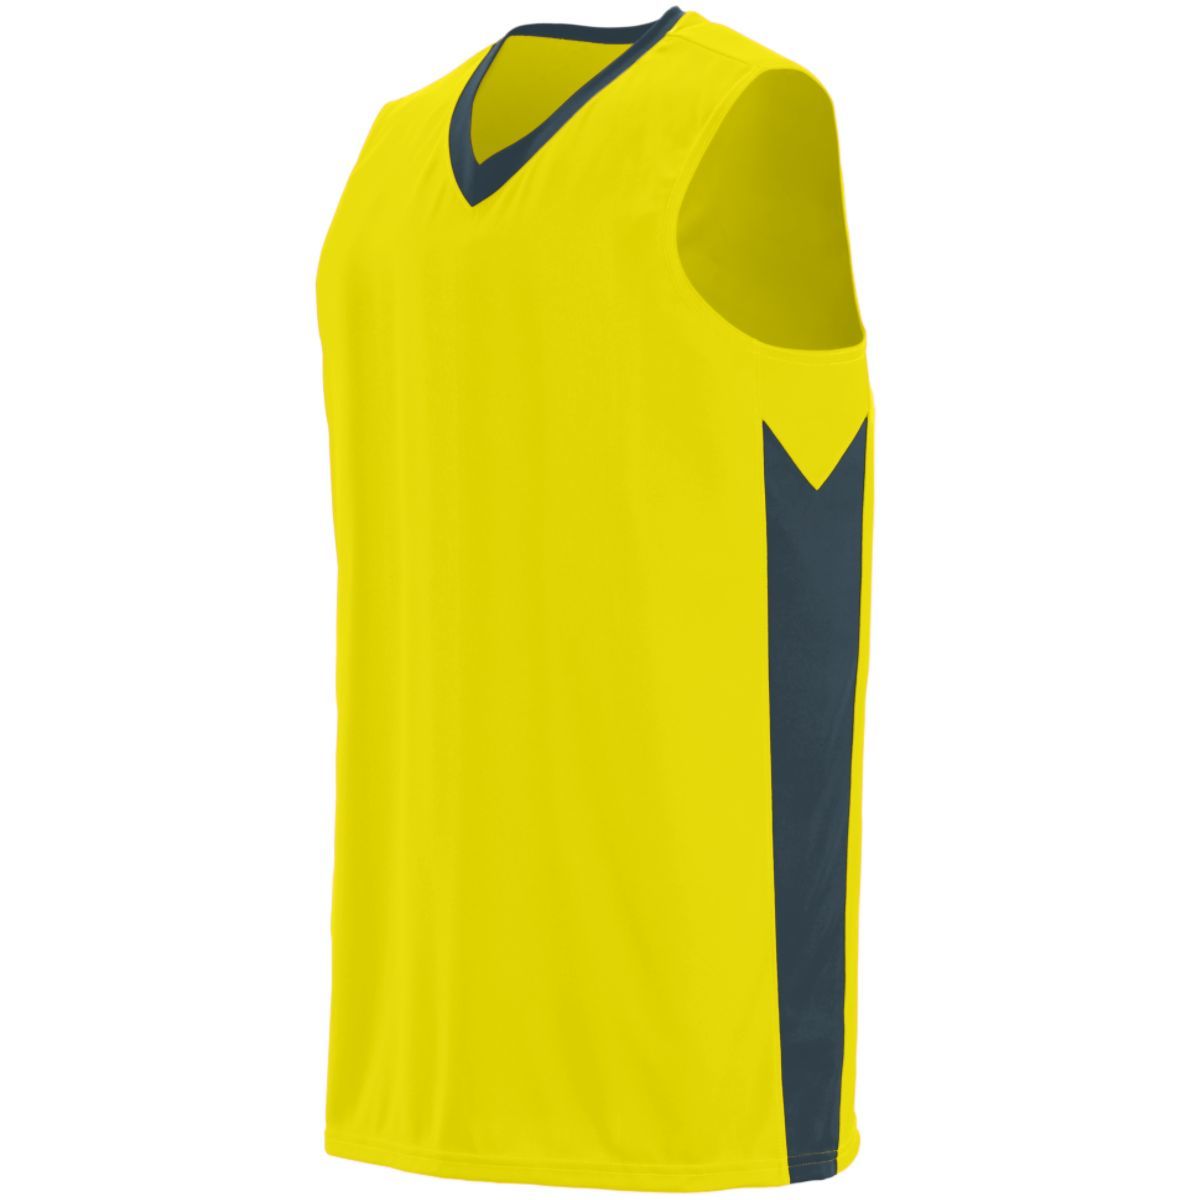 Augusta Sportswear Youth Block Out Jersey in Power Yellow/Slate  -Part of the Youth, Youth-Jersey, Augusta-Products, Basketball, Shirts, All-Sports, All-Sports-1 product lines at KanaleyCreations.com